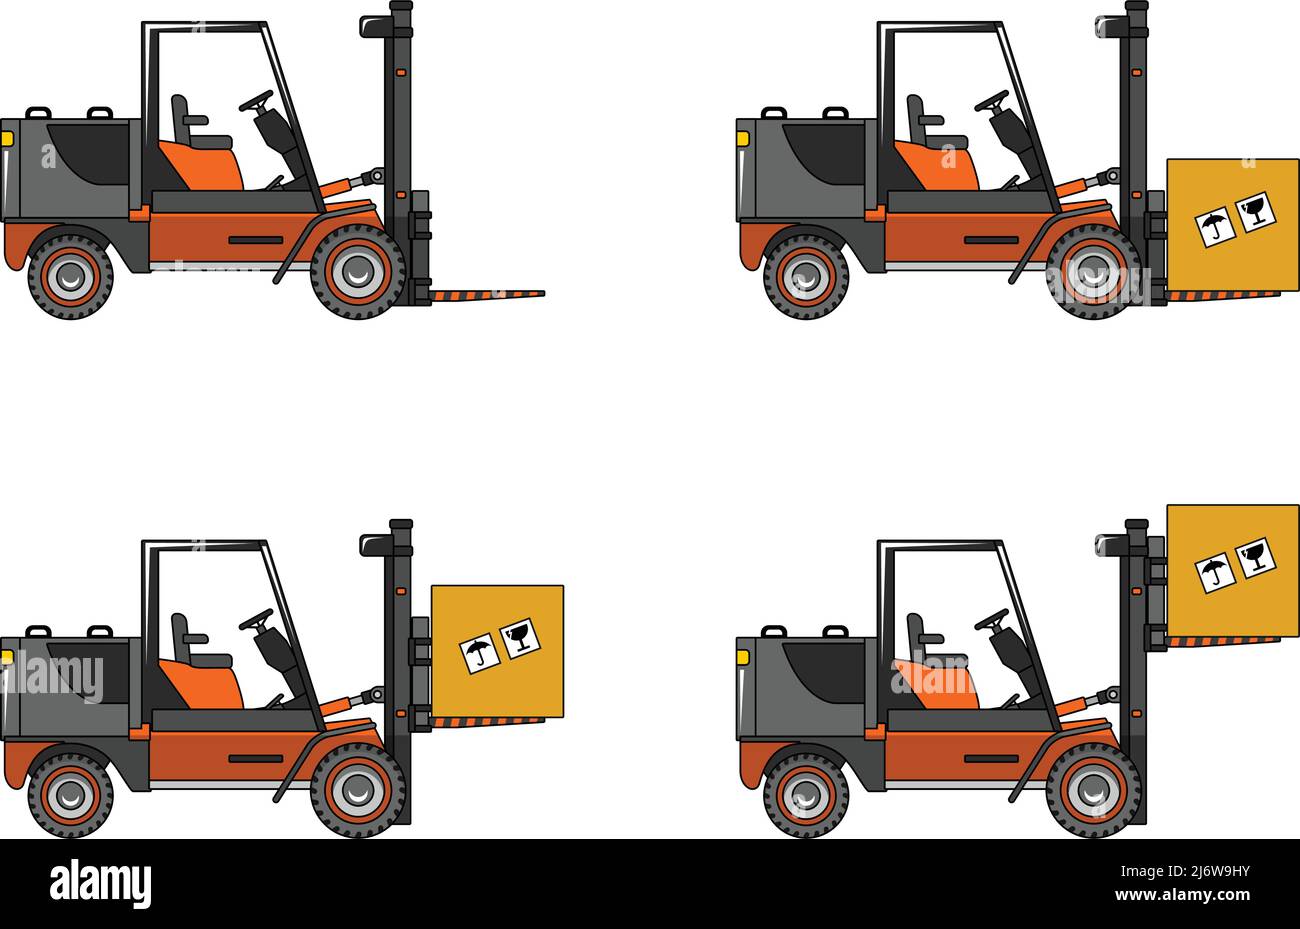 Detailed illustration of forklifts, heavy equipment and machinery Stock Vector